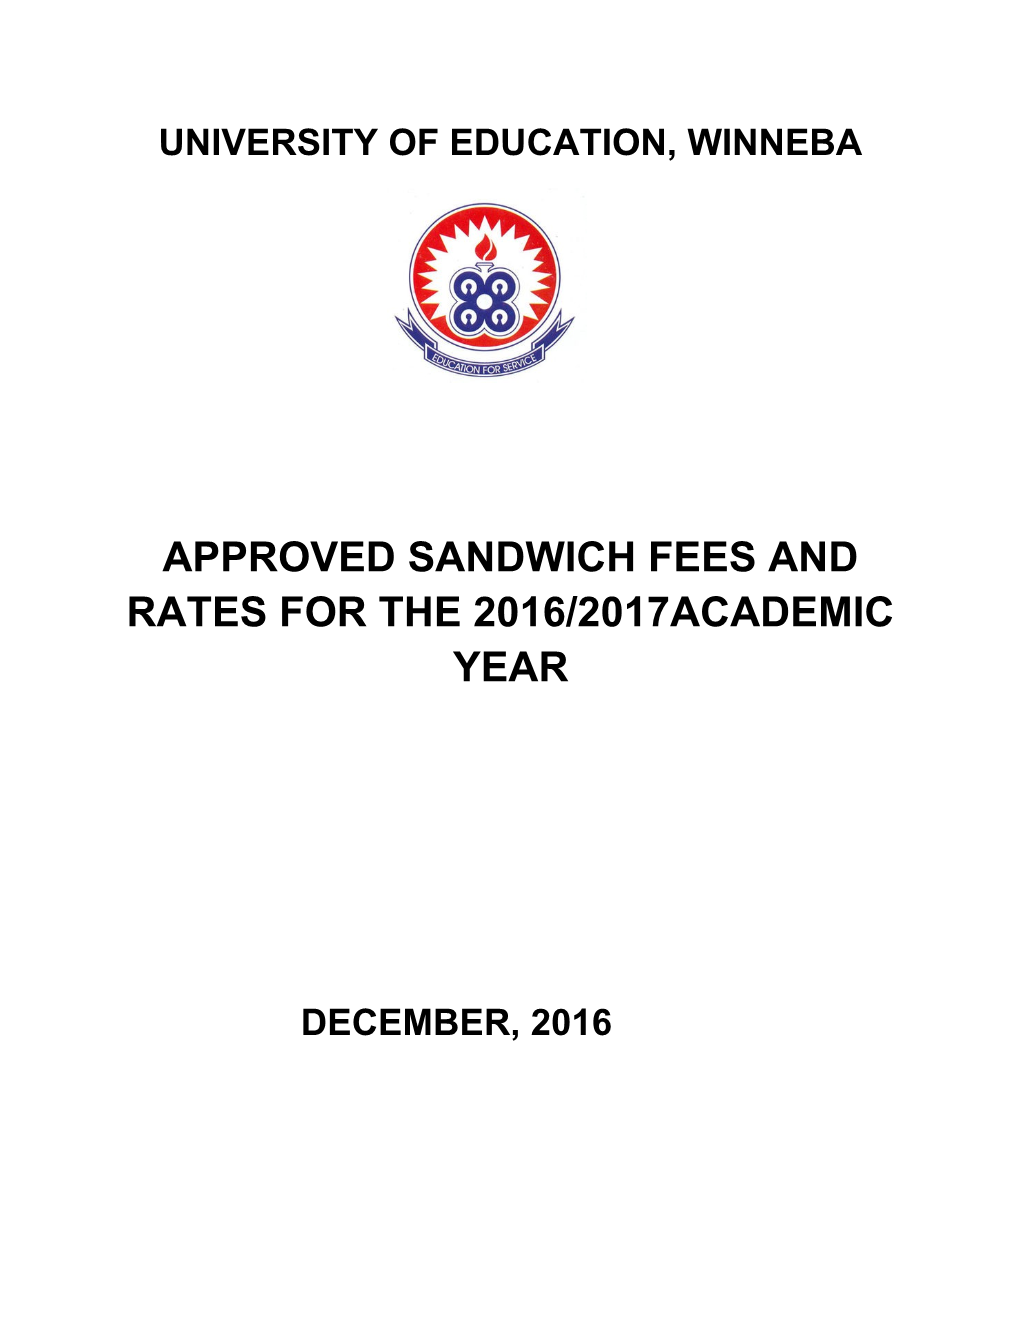 Sandwich Students Fees Per Session (Accommodation Fee Is Excluded)